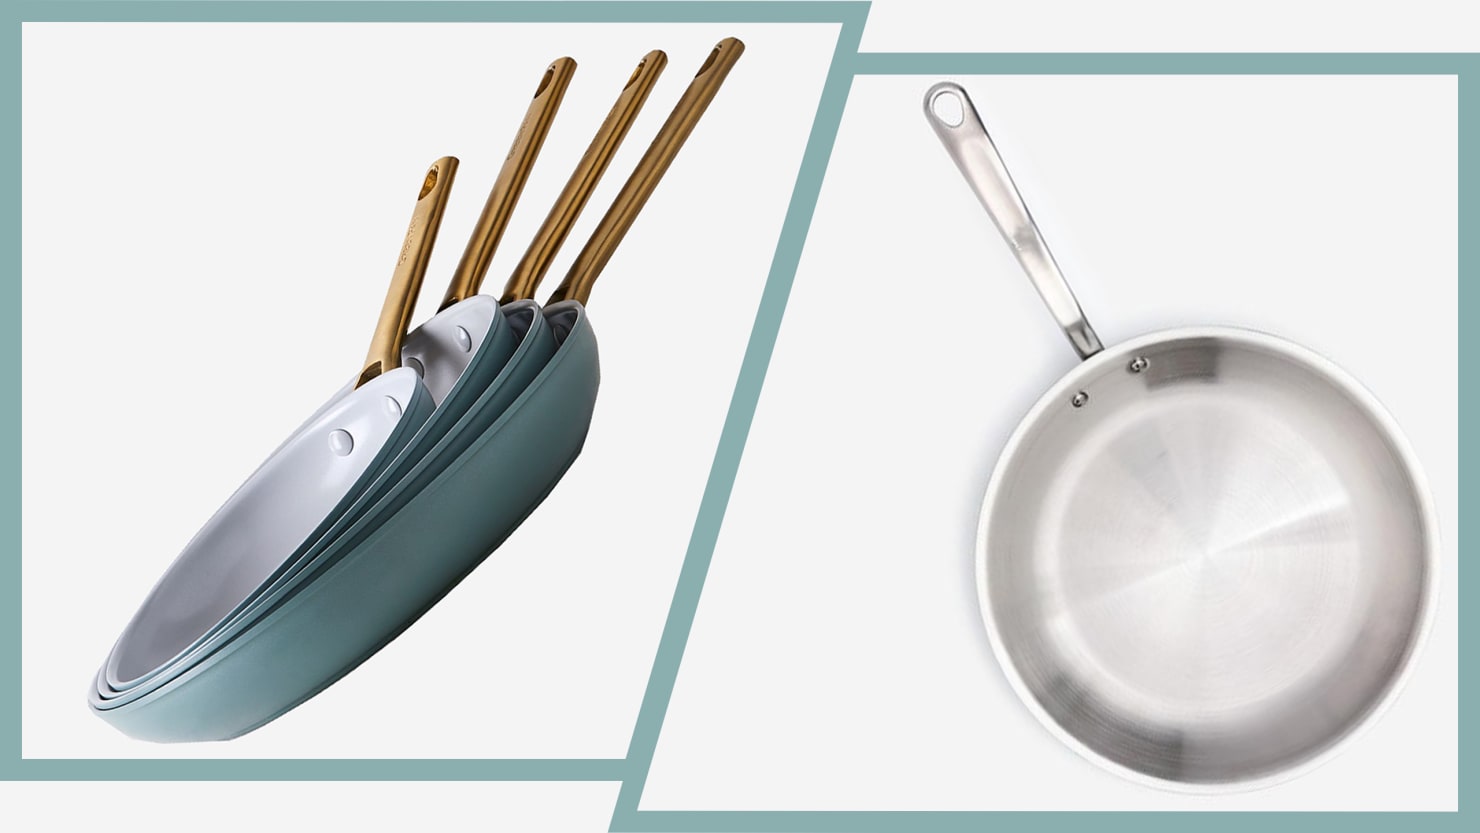 The Difference Between Nonstick and Stainless Steel Cookware